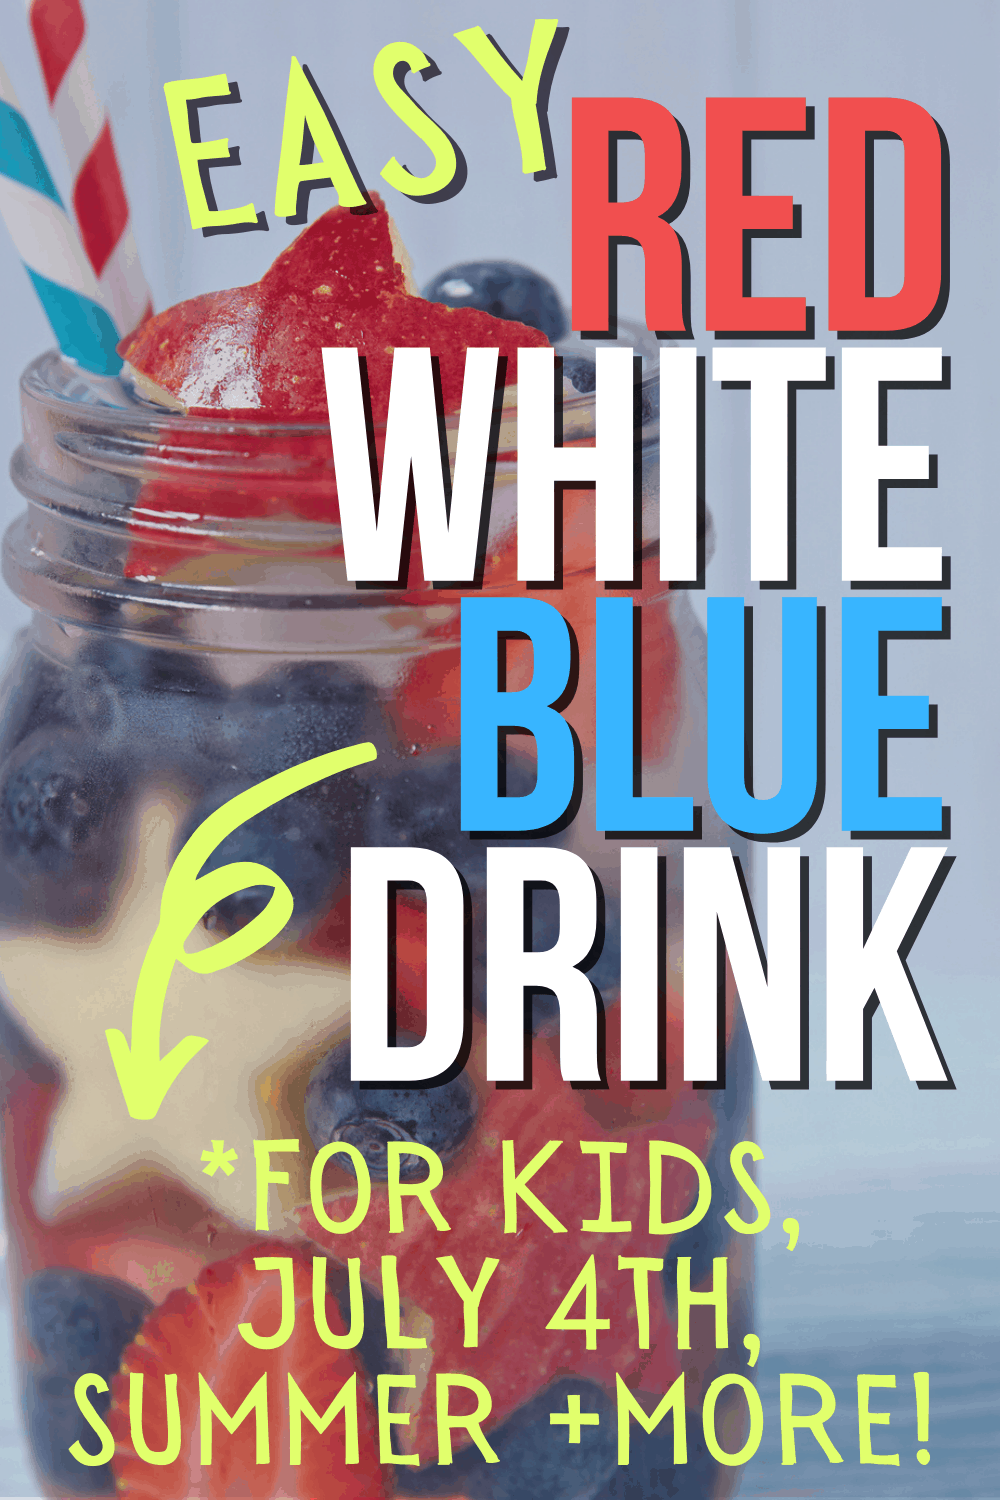 RED WHITE BLUE DRINK FOR KIDS